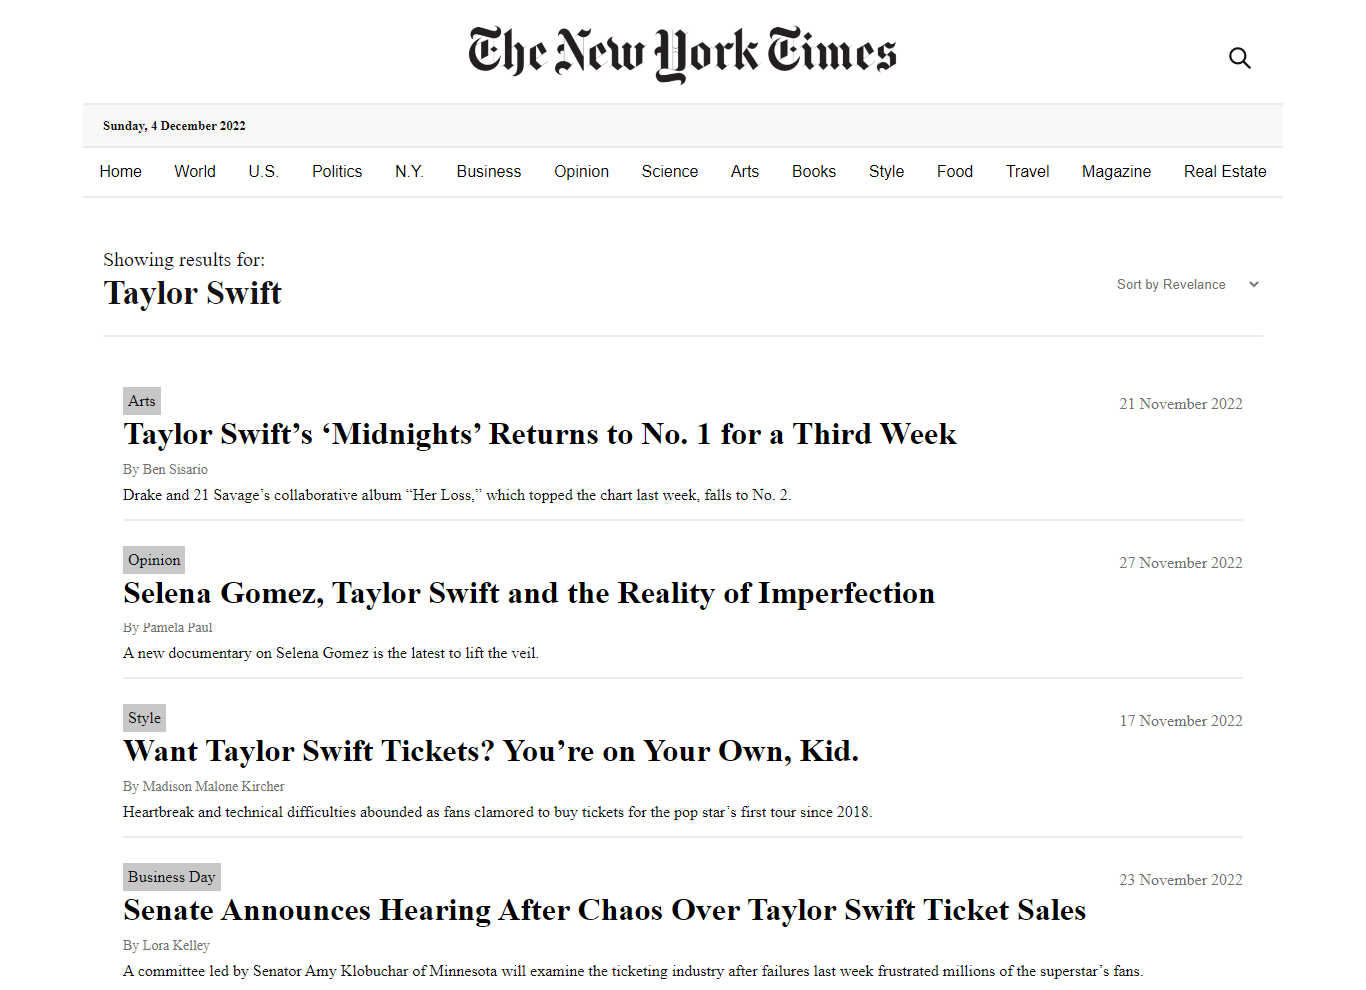 newyorktimes-clone-search-results-preview.png